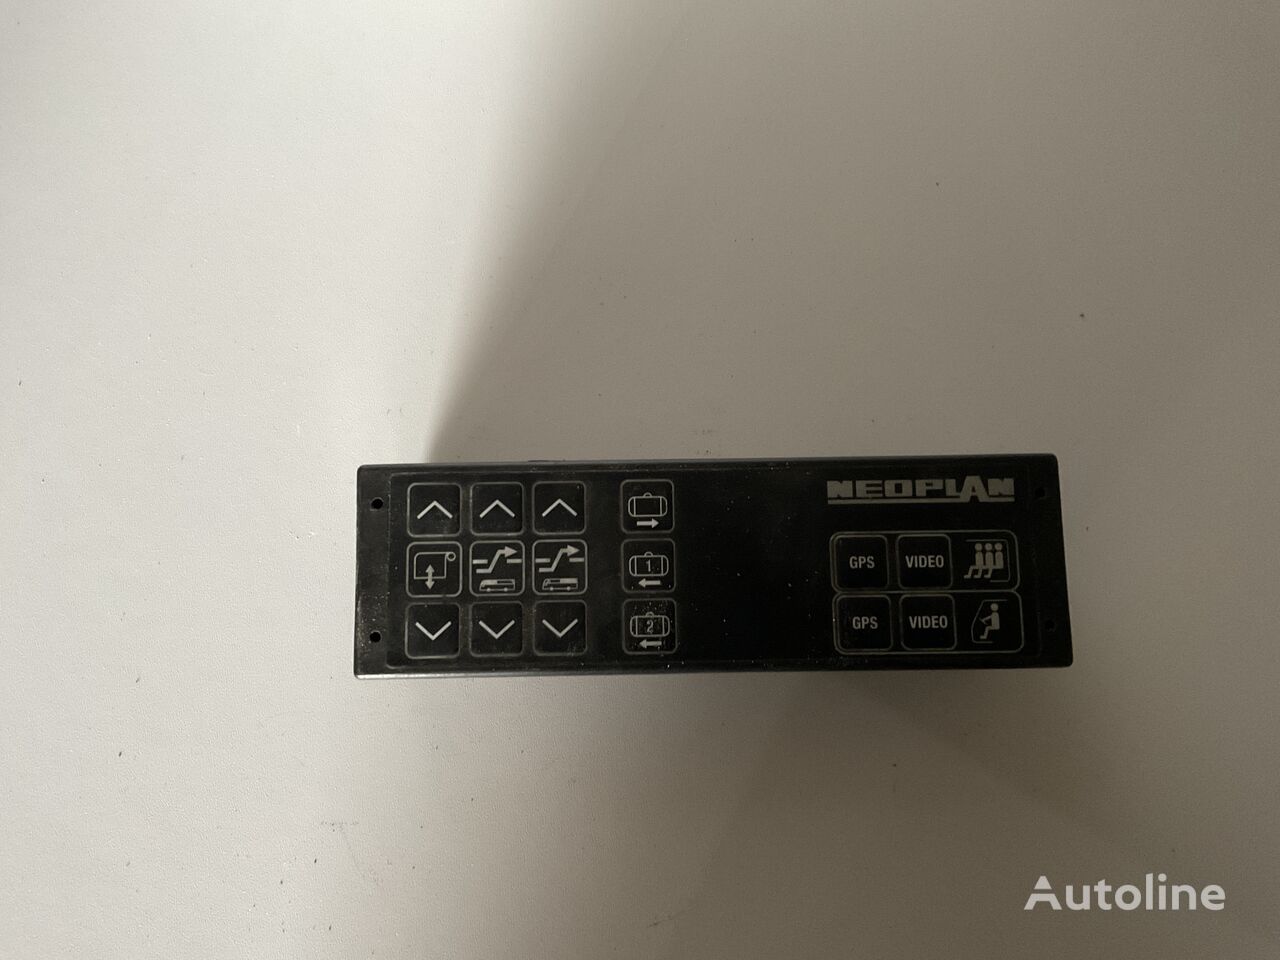 Neoplan Bader typ. 0215.1.A01 0215.1A01.91349 control unit for Neoplan bus